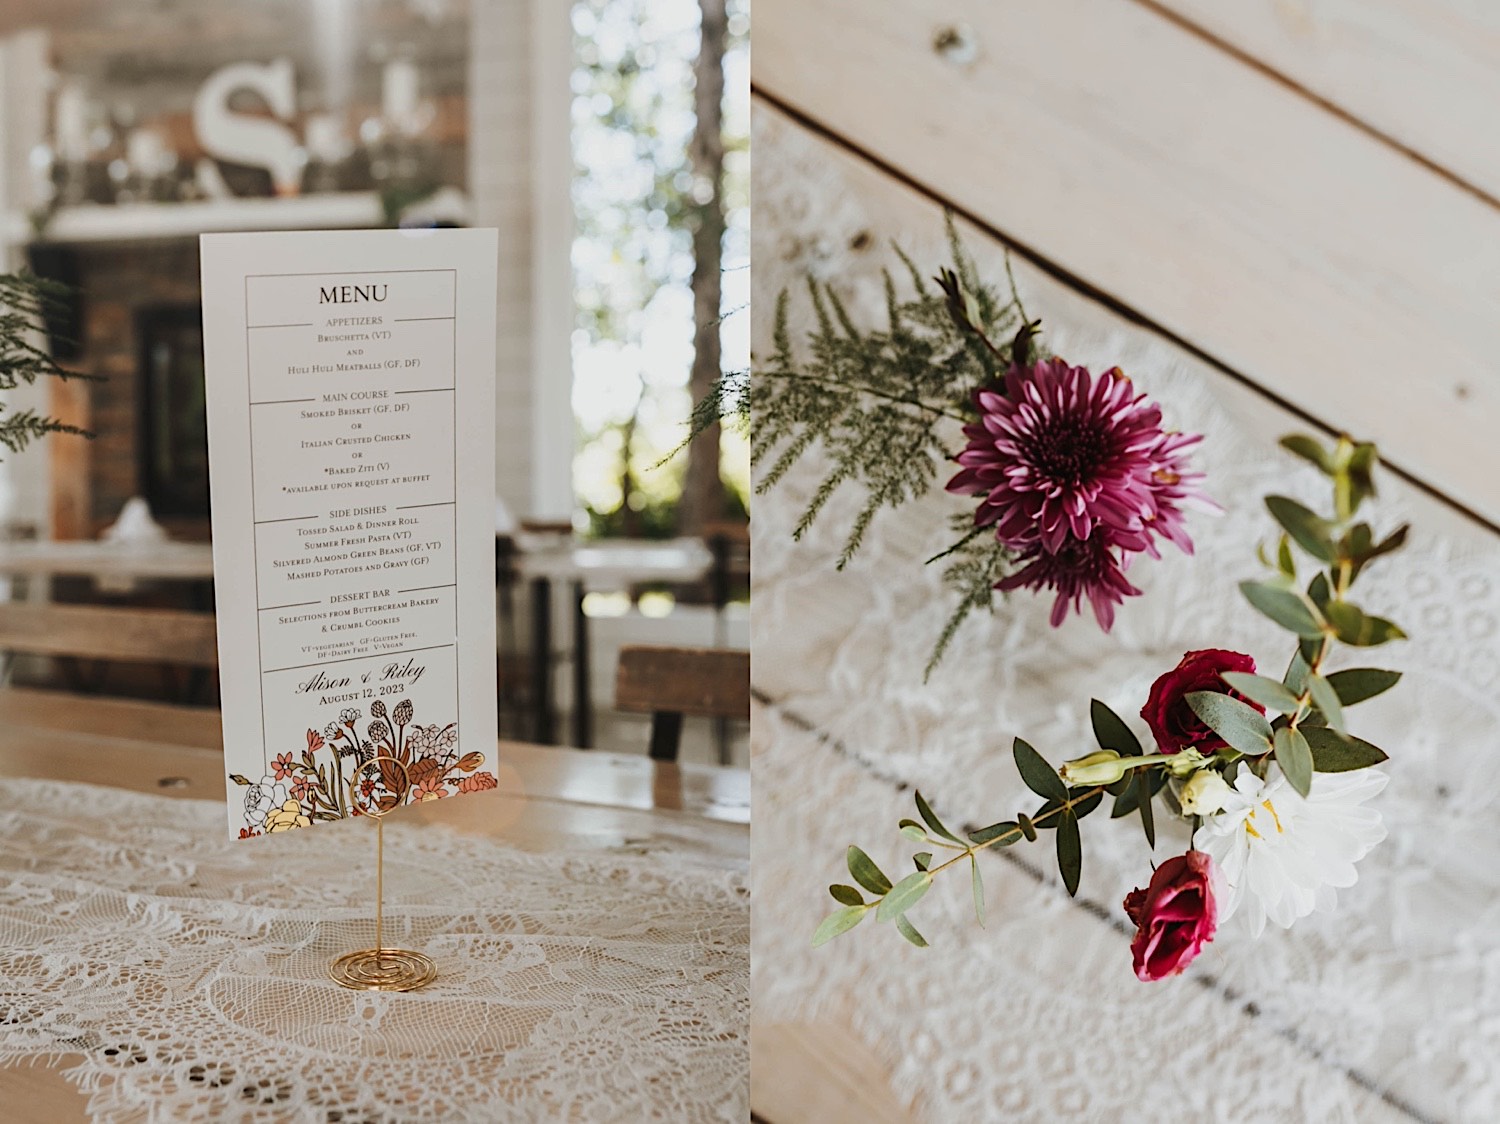 2 photos side by side, the left is a menu for a wedding reception, the right is a detail photo of flowers on a table